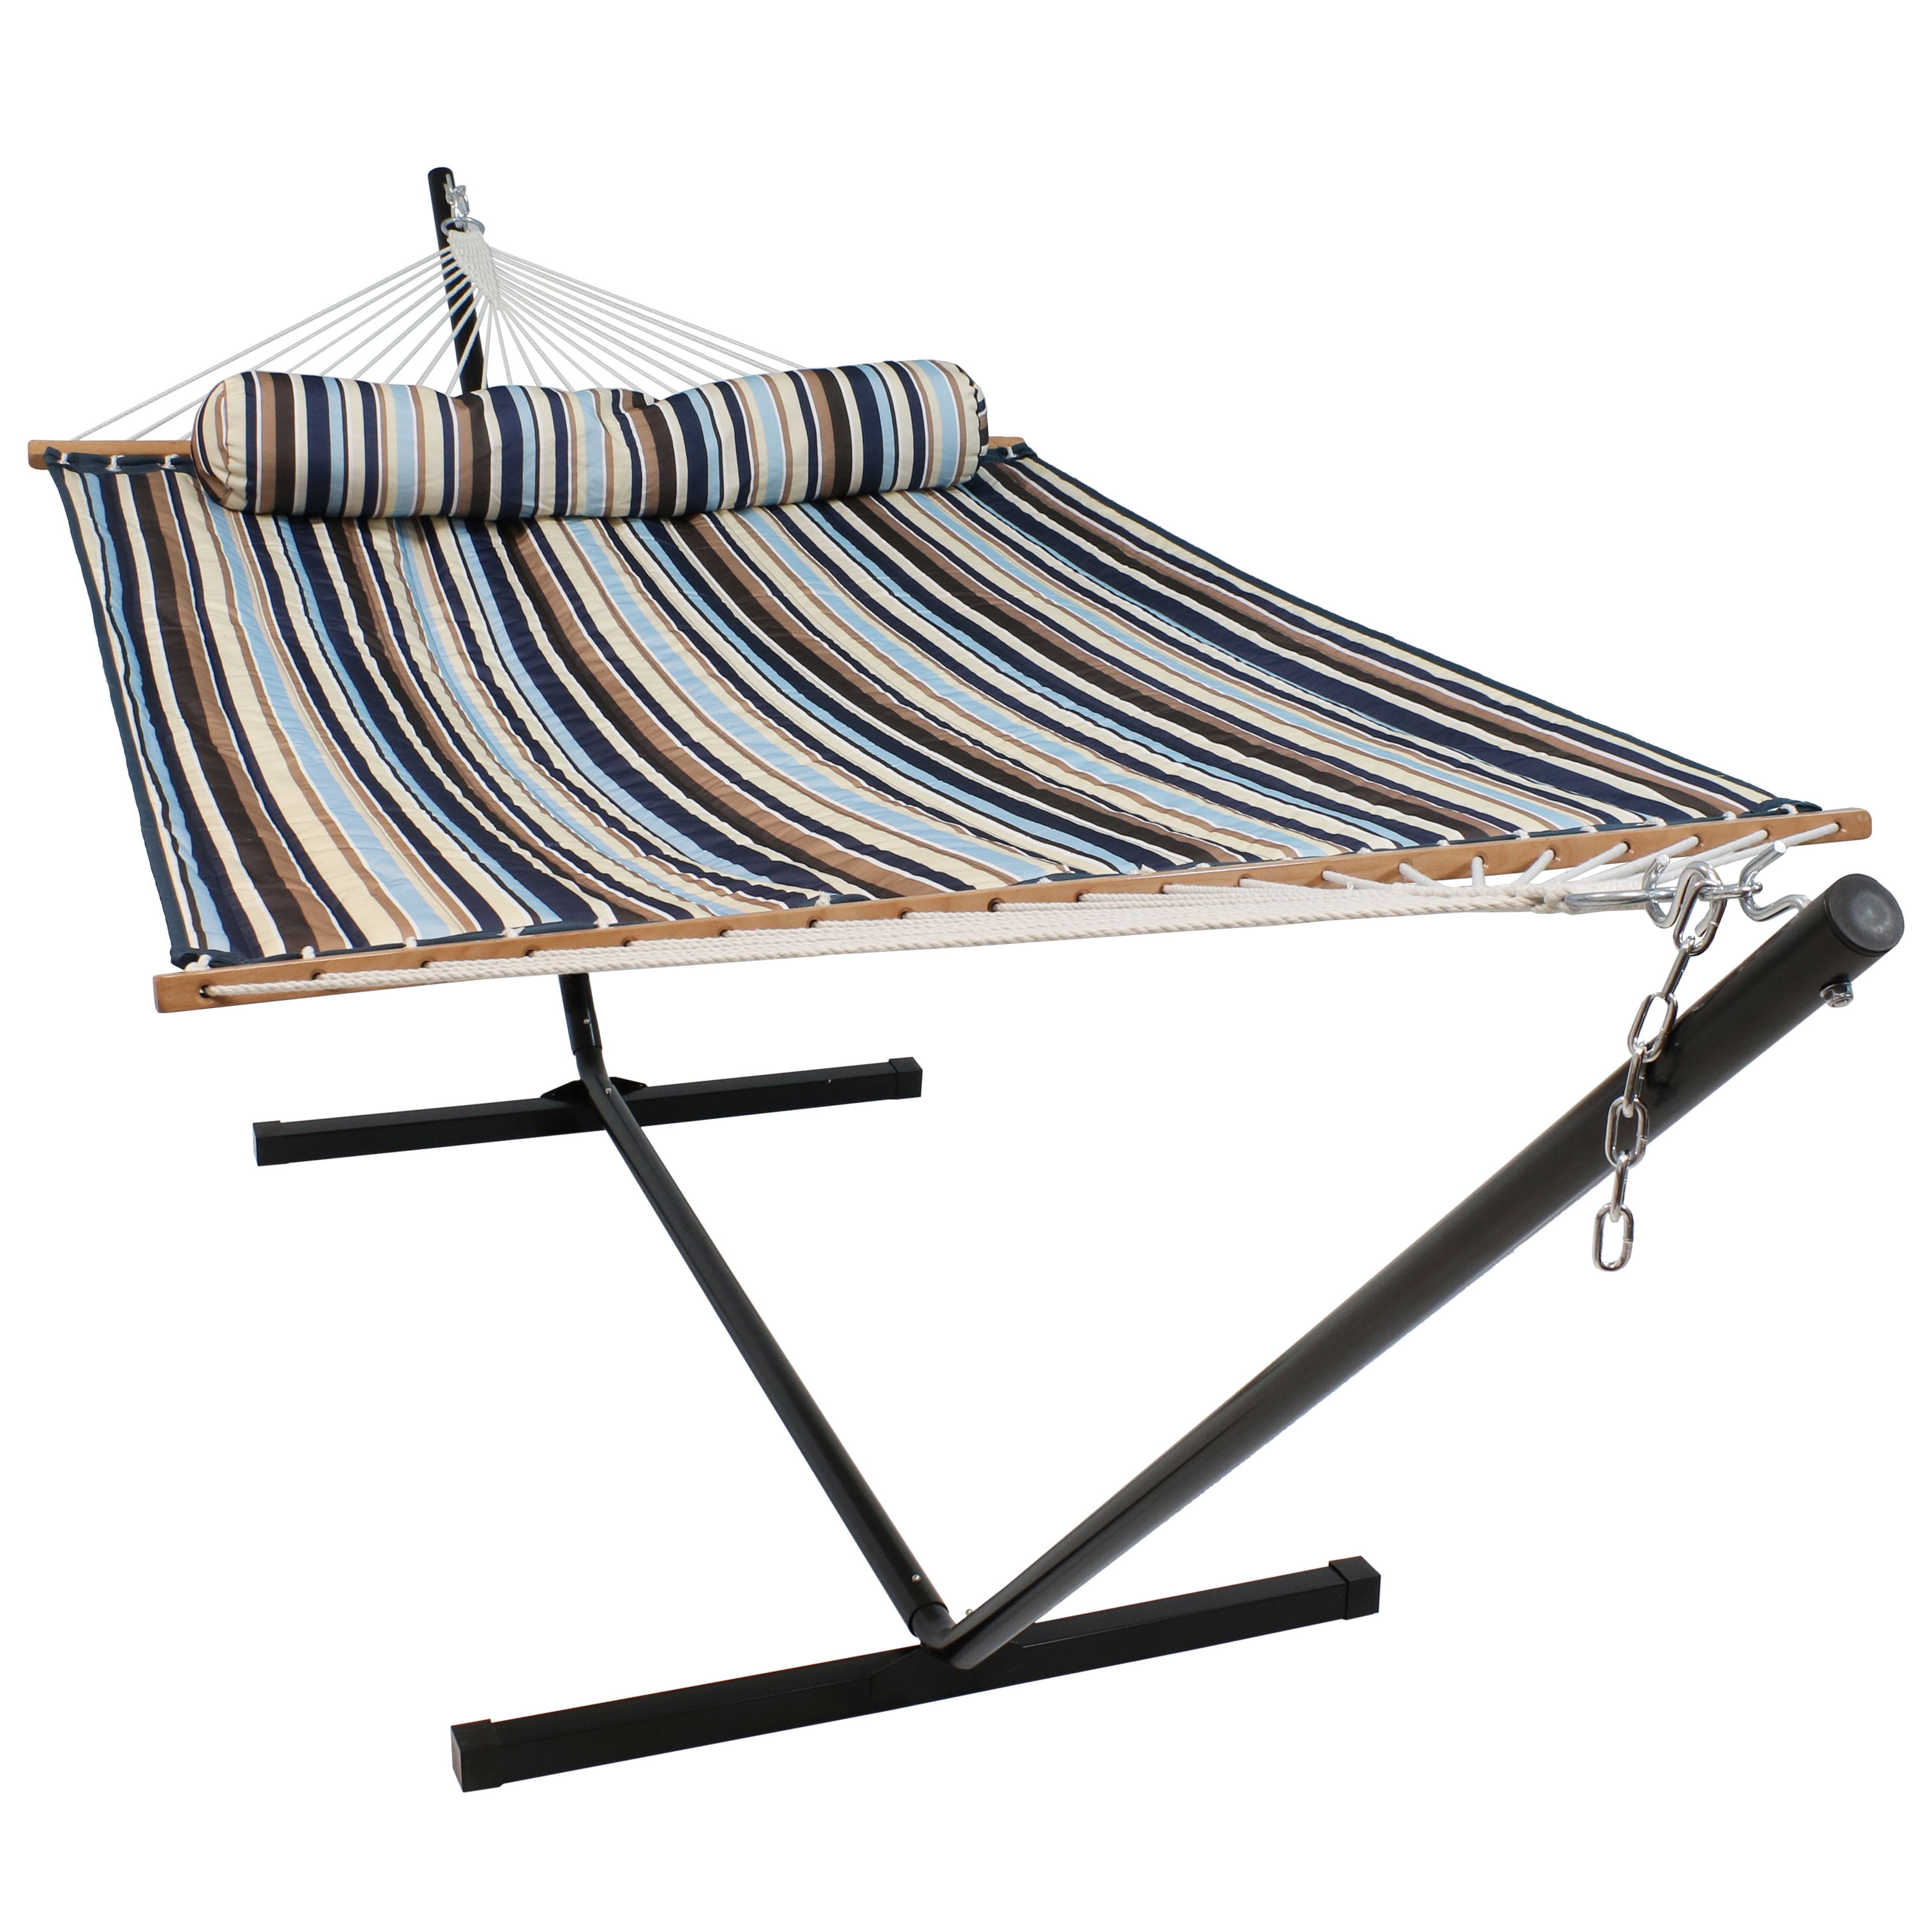 Ocean Isle Sunnydaze 2-Person Quilted Spreader Bar Hammock Bed w/ Pillow 